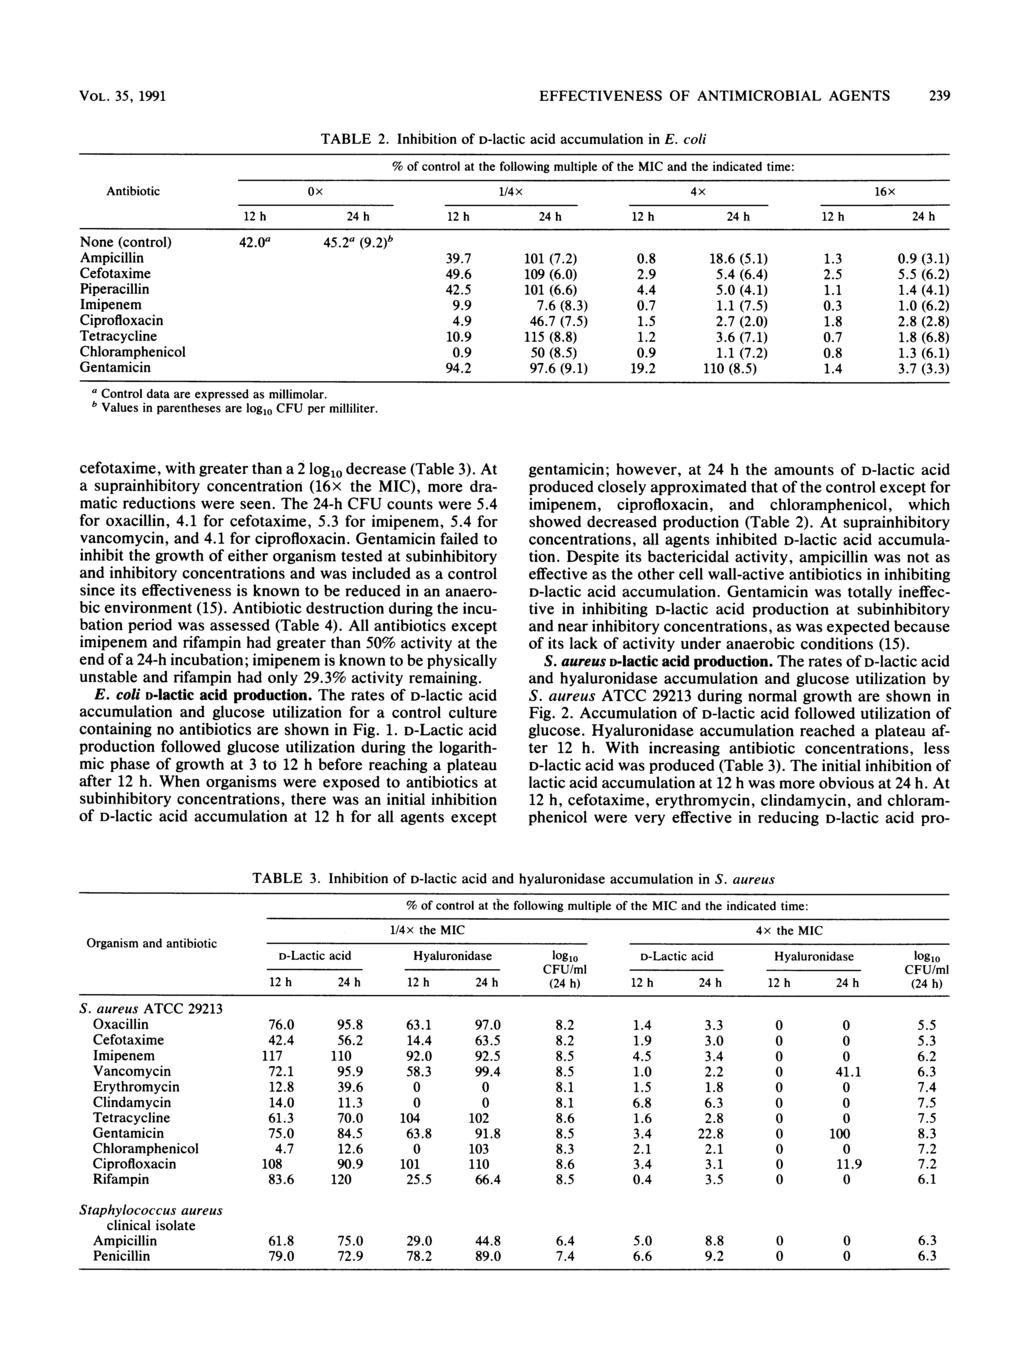 VOL. 35, 1991 EFFECTIVENESS OF ANTIMICROBIAL AGENTS 239 TABLE 2. Inhibition of D-lactic acid accumulation in E.